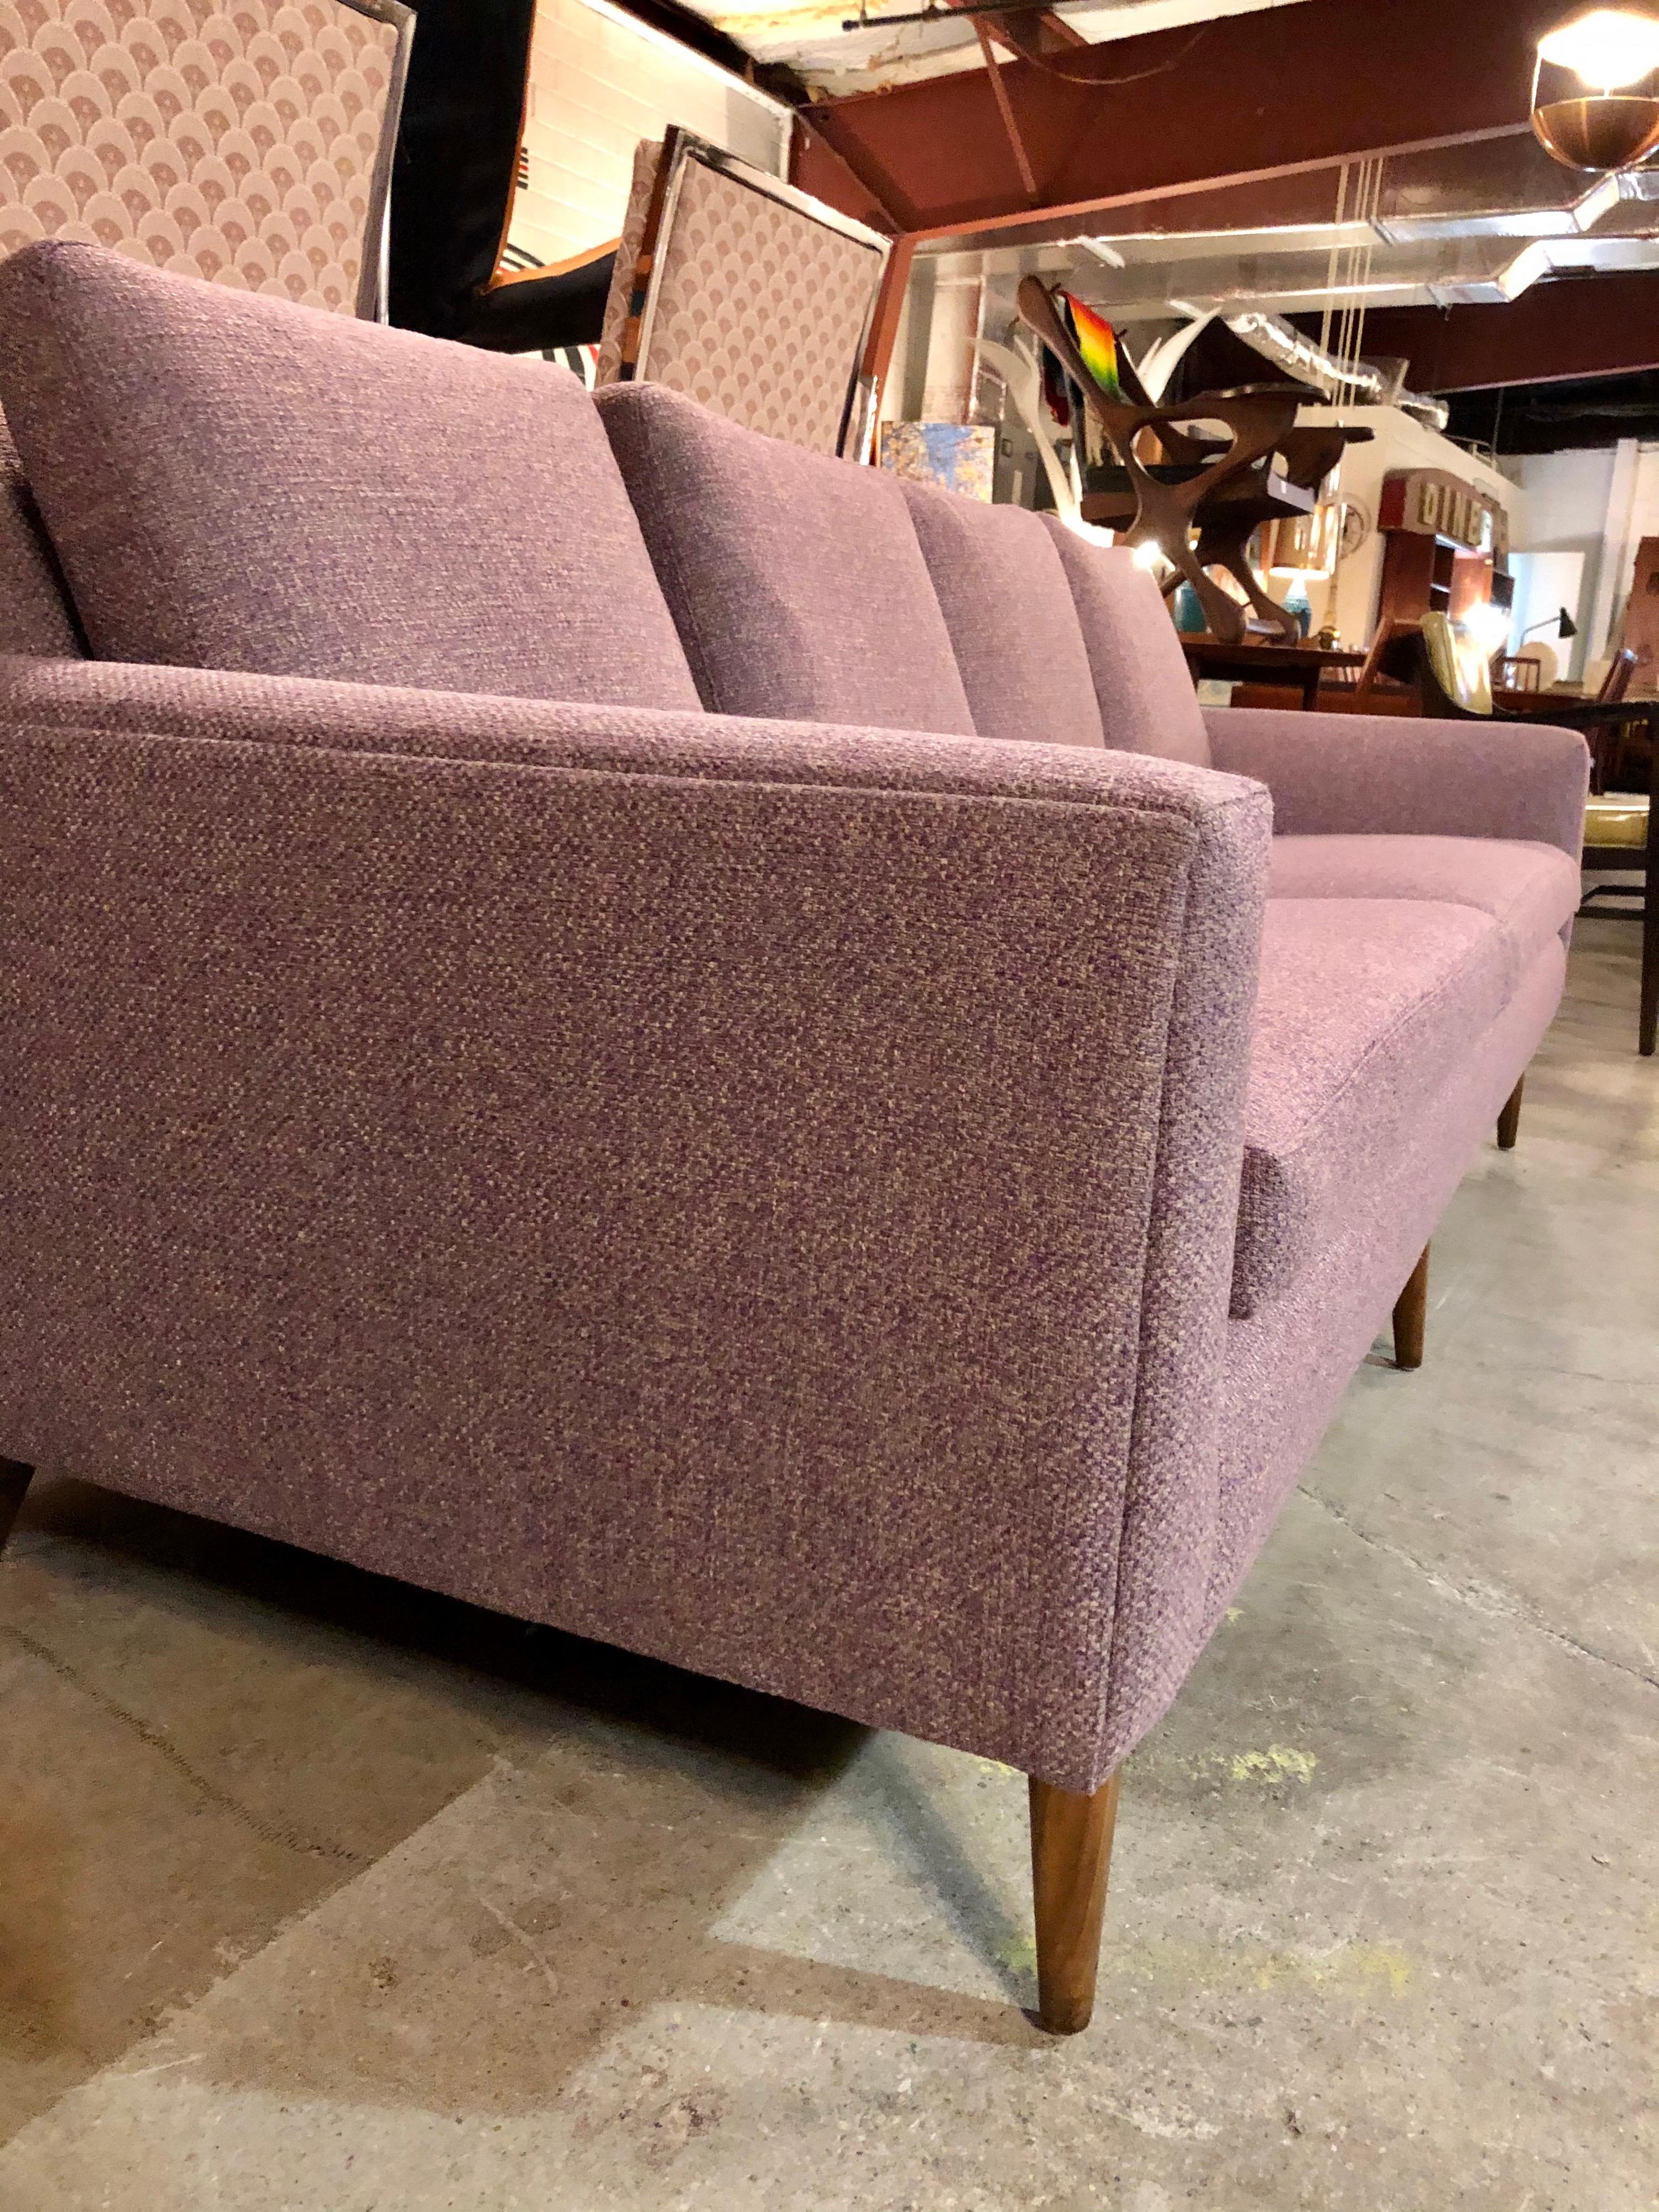 Designed by Paul McCobb for Directional, this sofa is in overall good condition. New lavender wool upholstery. 1960s. USA.
Dimensions:
29.5”H x 33” D x 85” W
17.5” seat height
24” arm height.